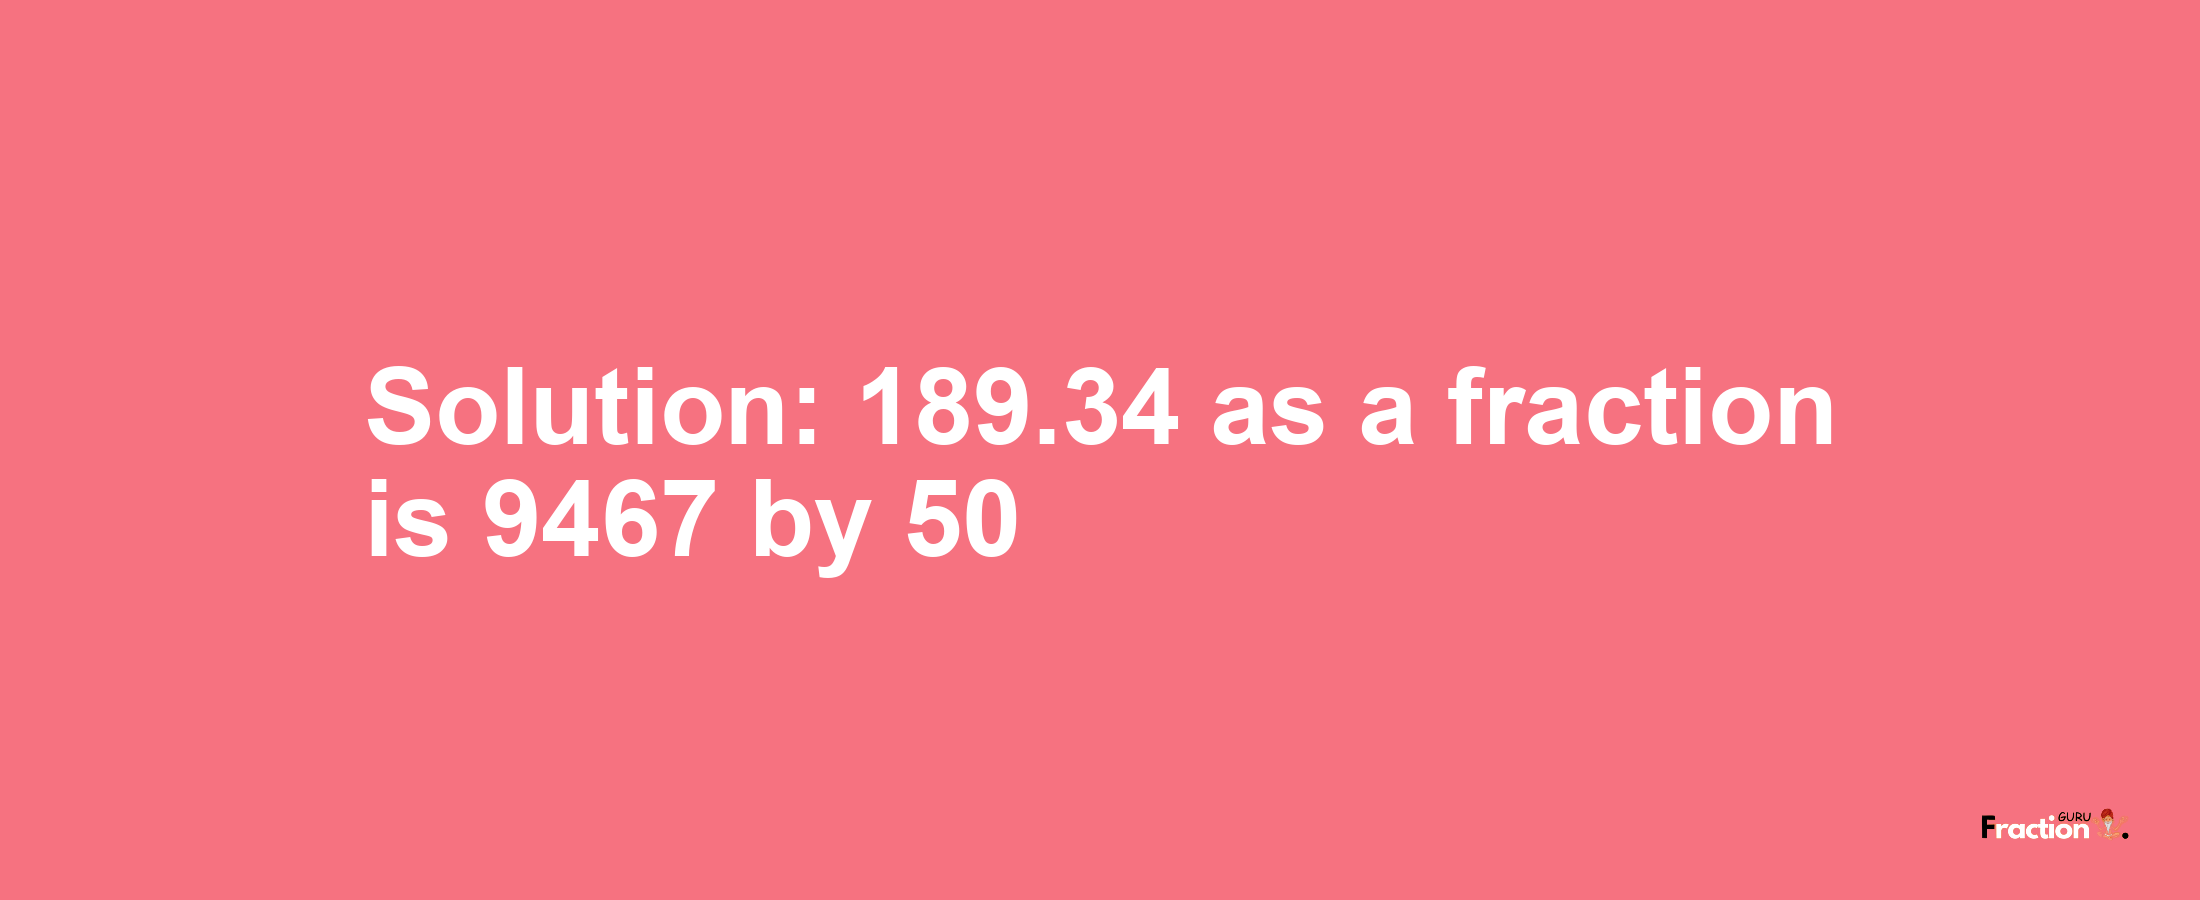 Solution:189.34 as a fraction is 9467/50